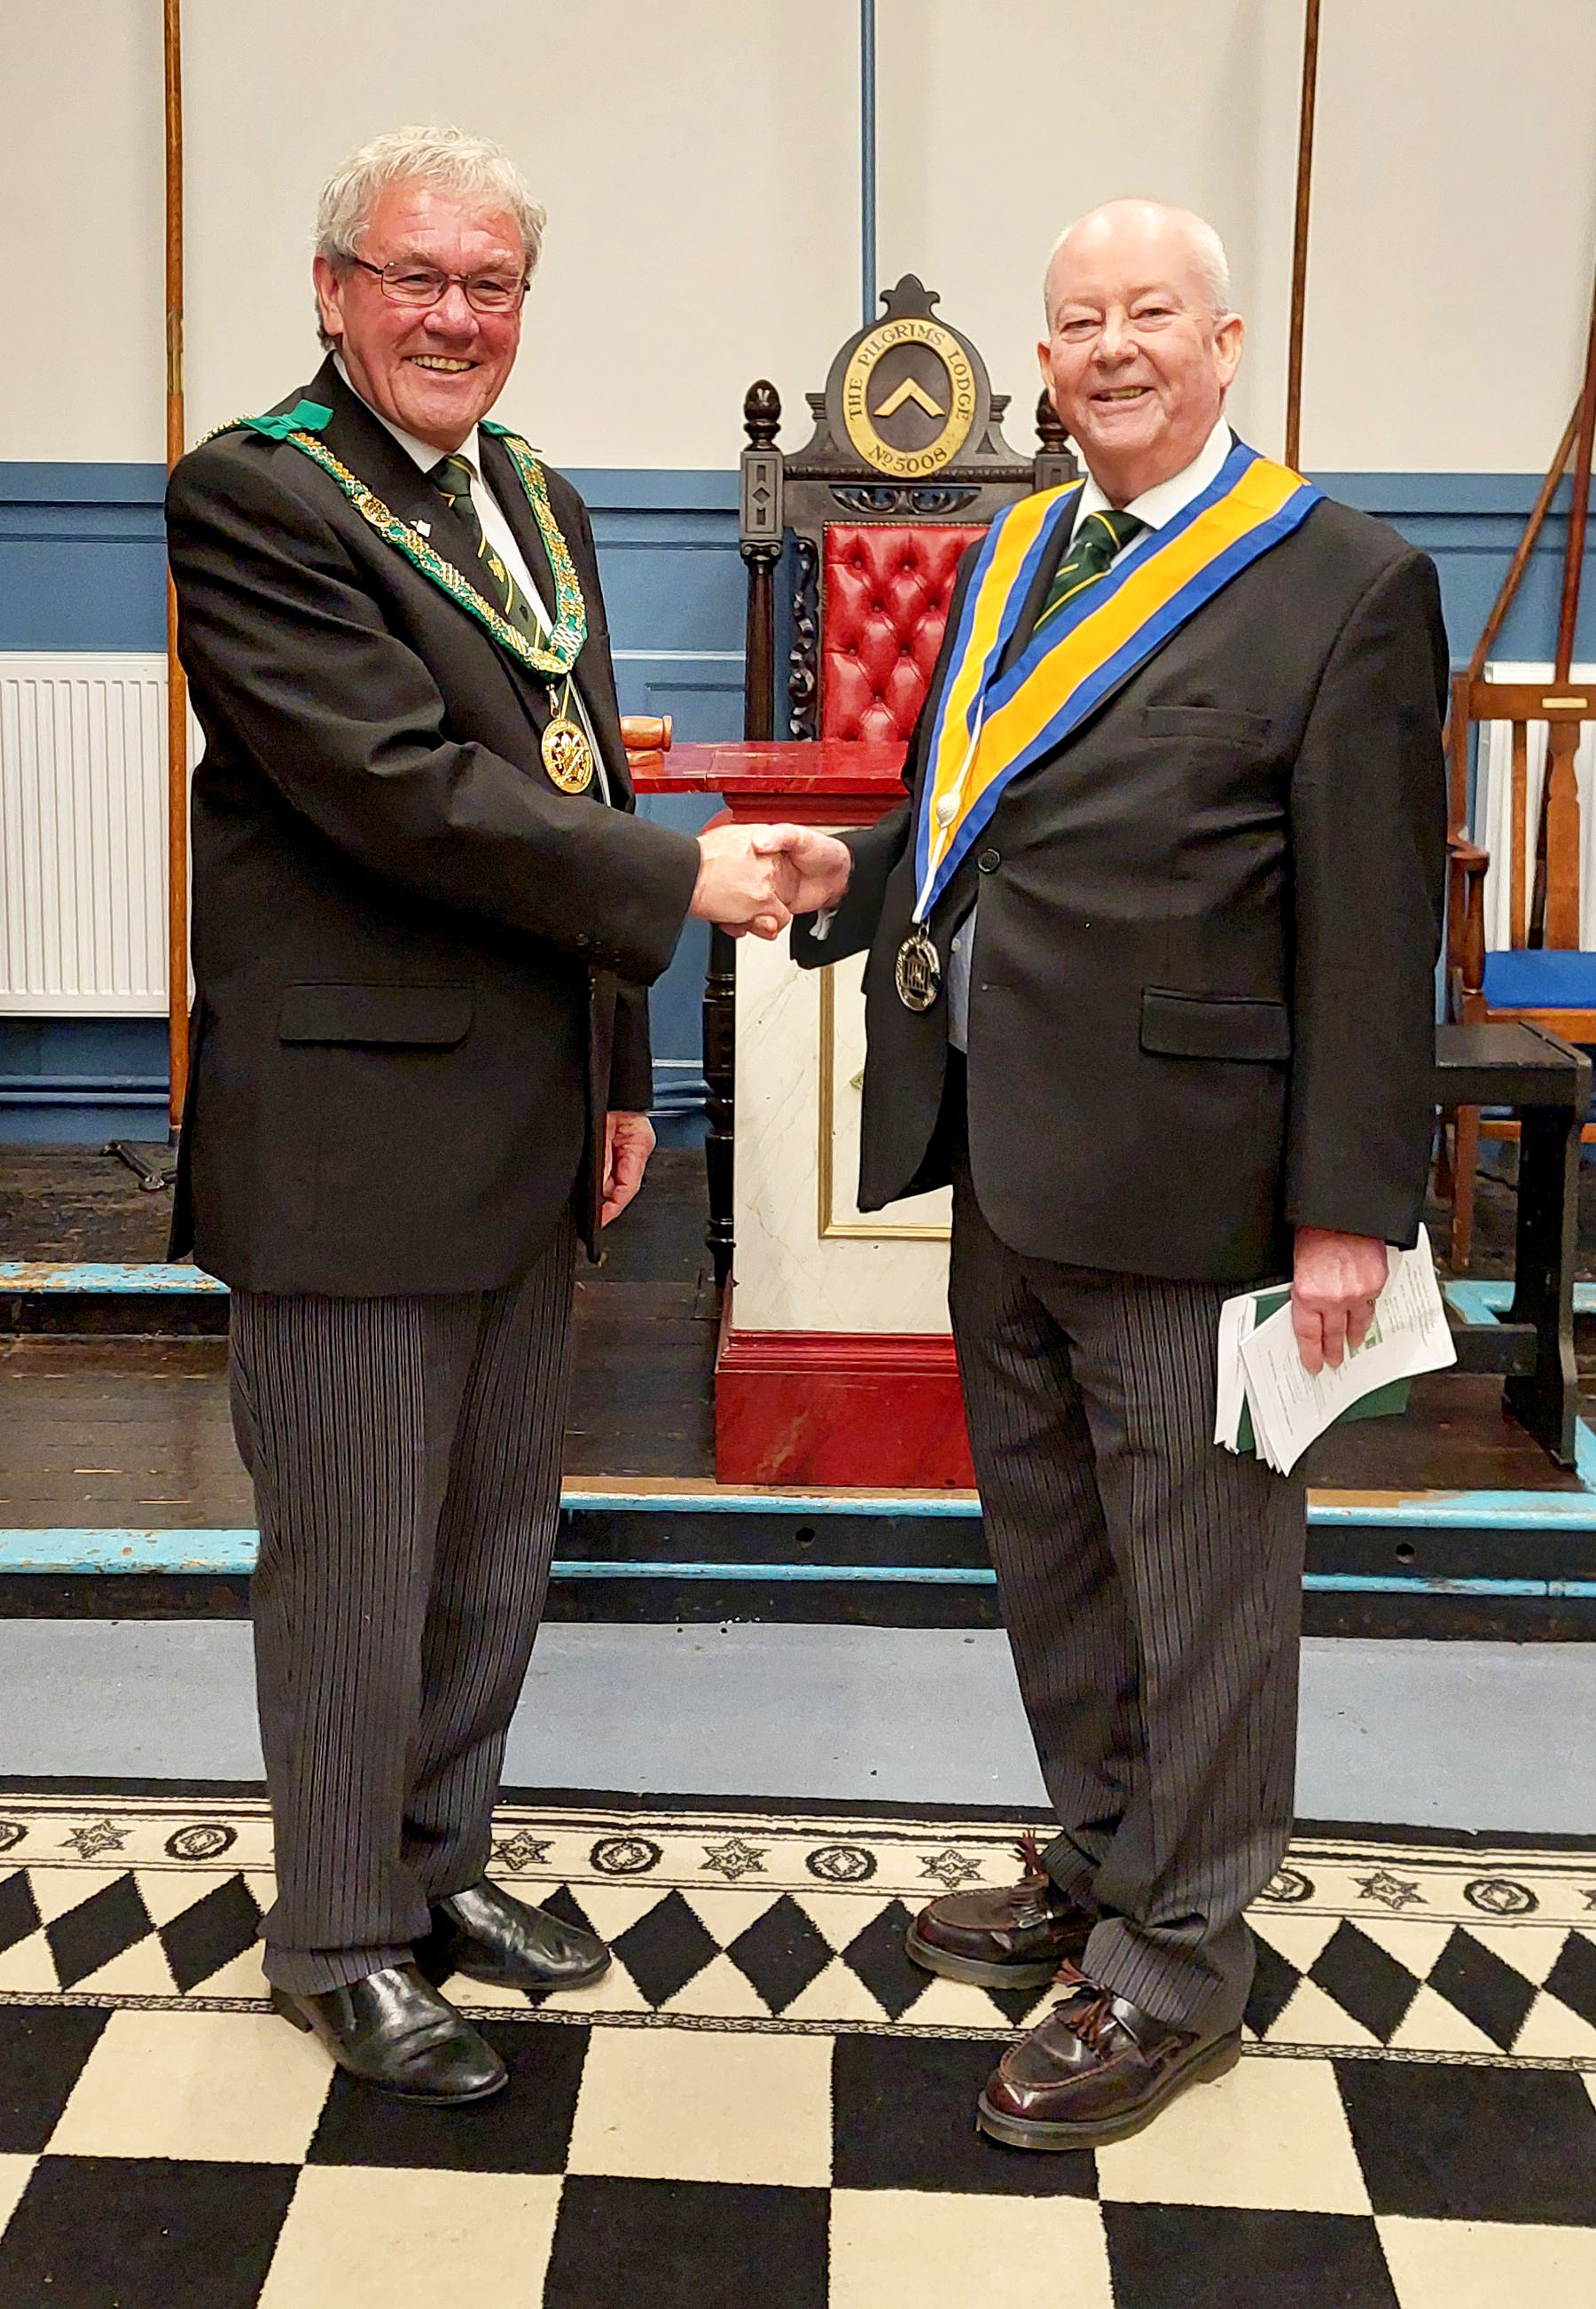 The D.G. P. congratulates W.Bro. Nigel Cash following his installation as Master of the Council